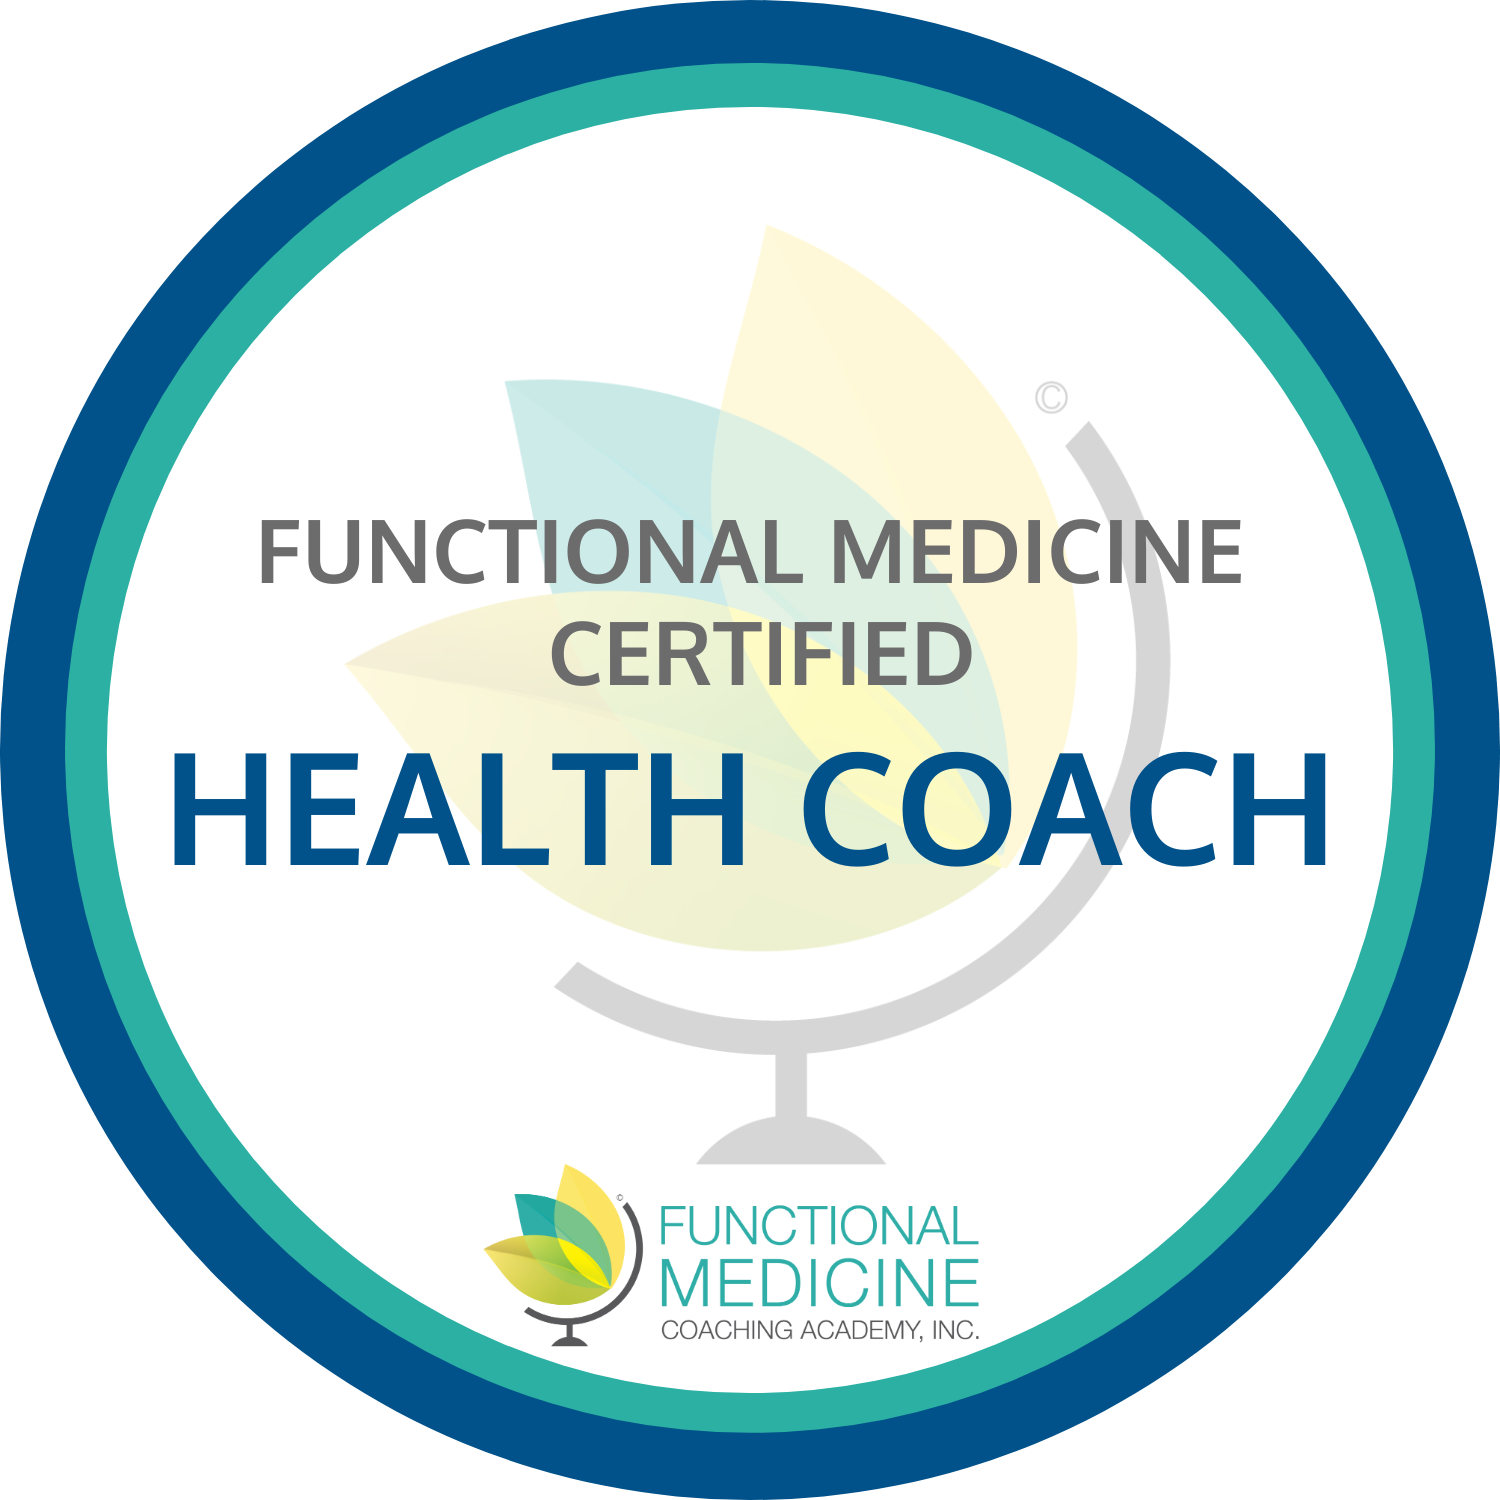 FMCA_Certified_Health_Coach_Seal_9-20.png